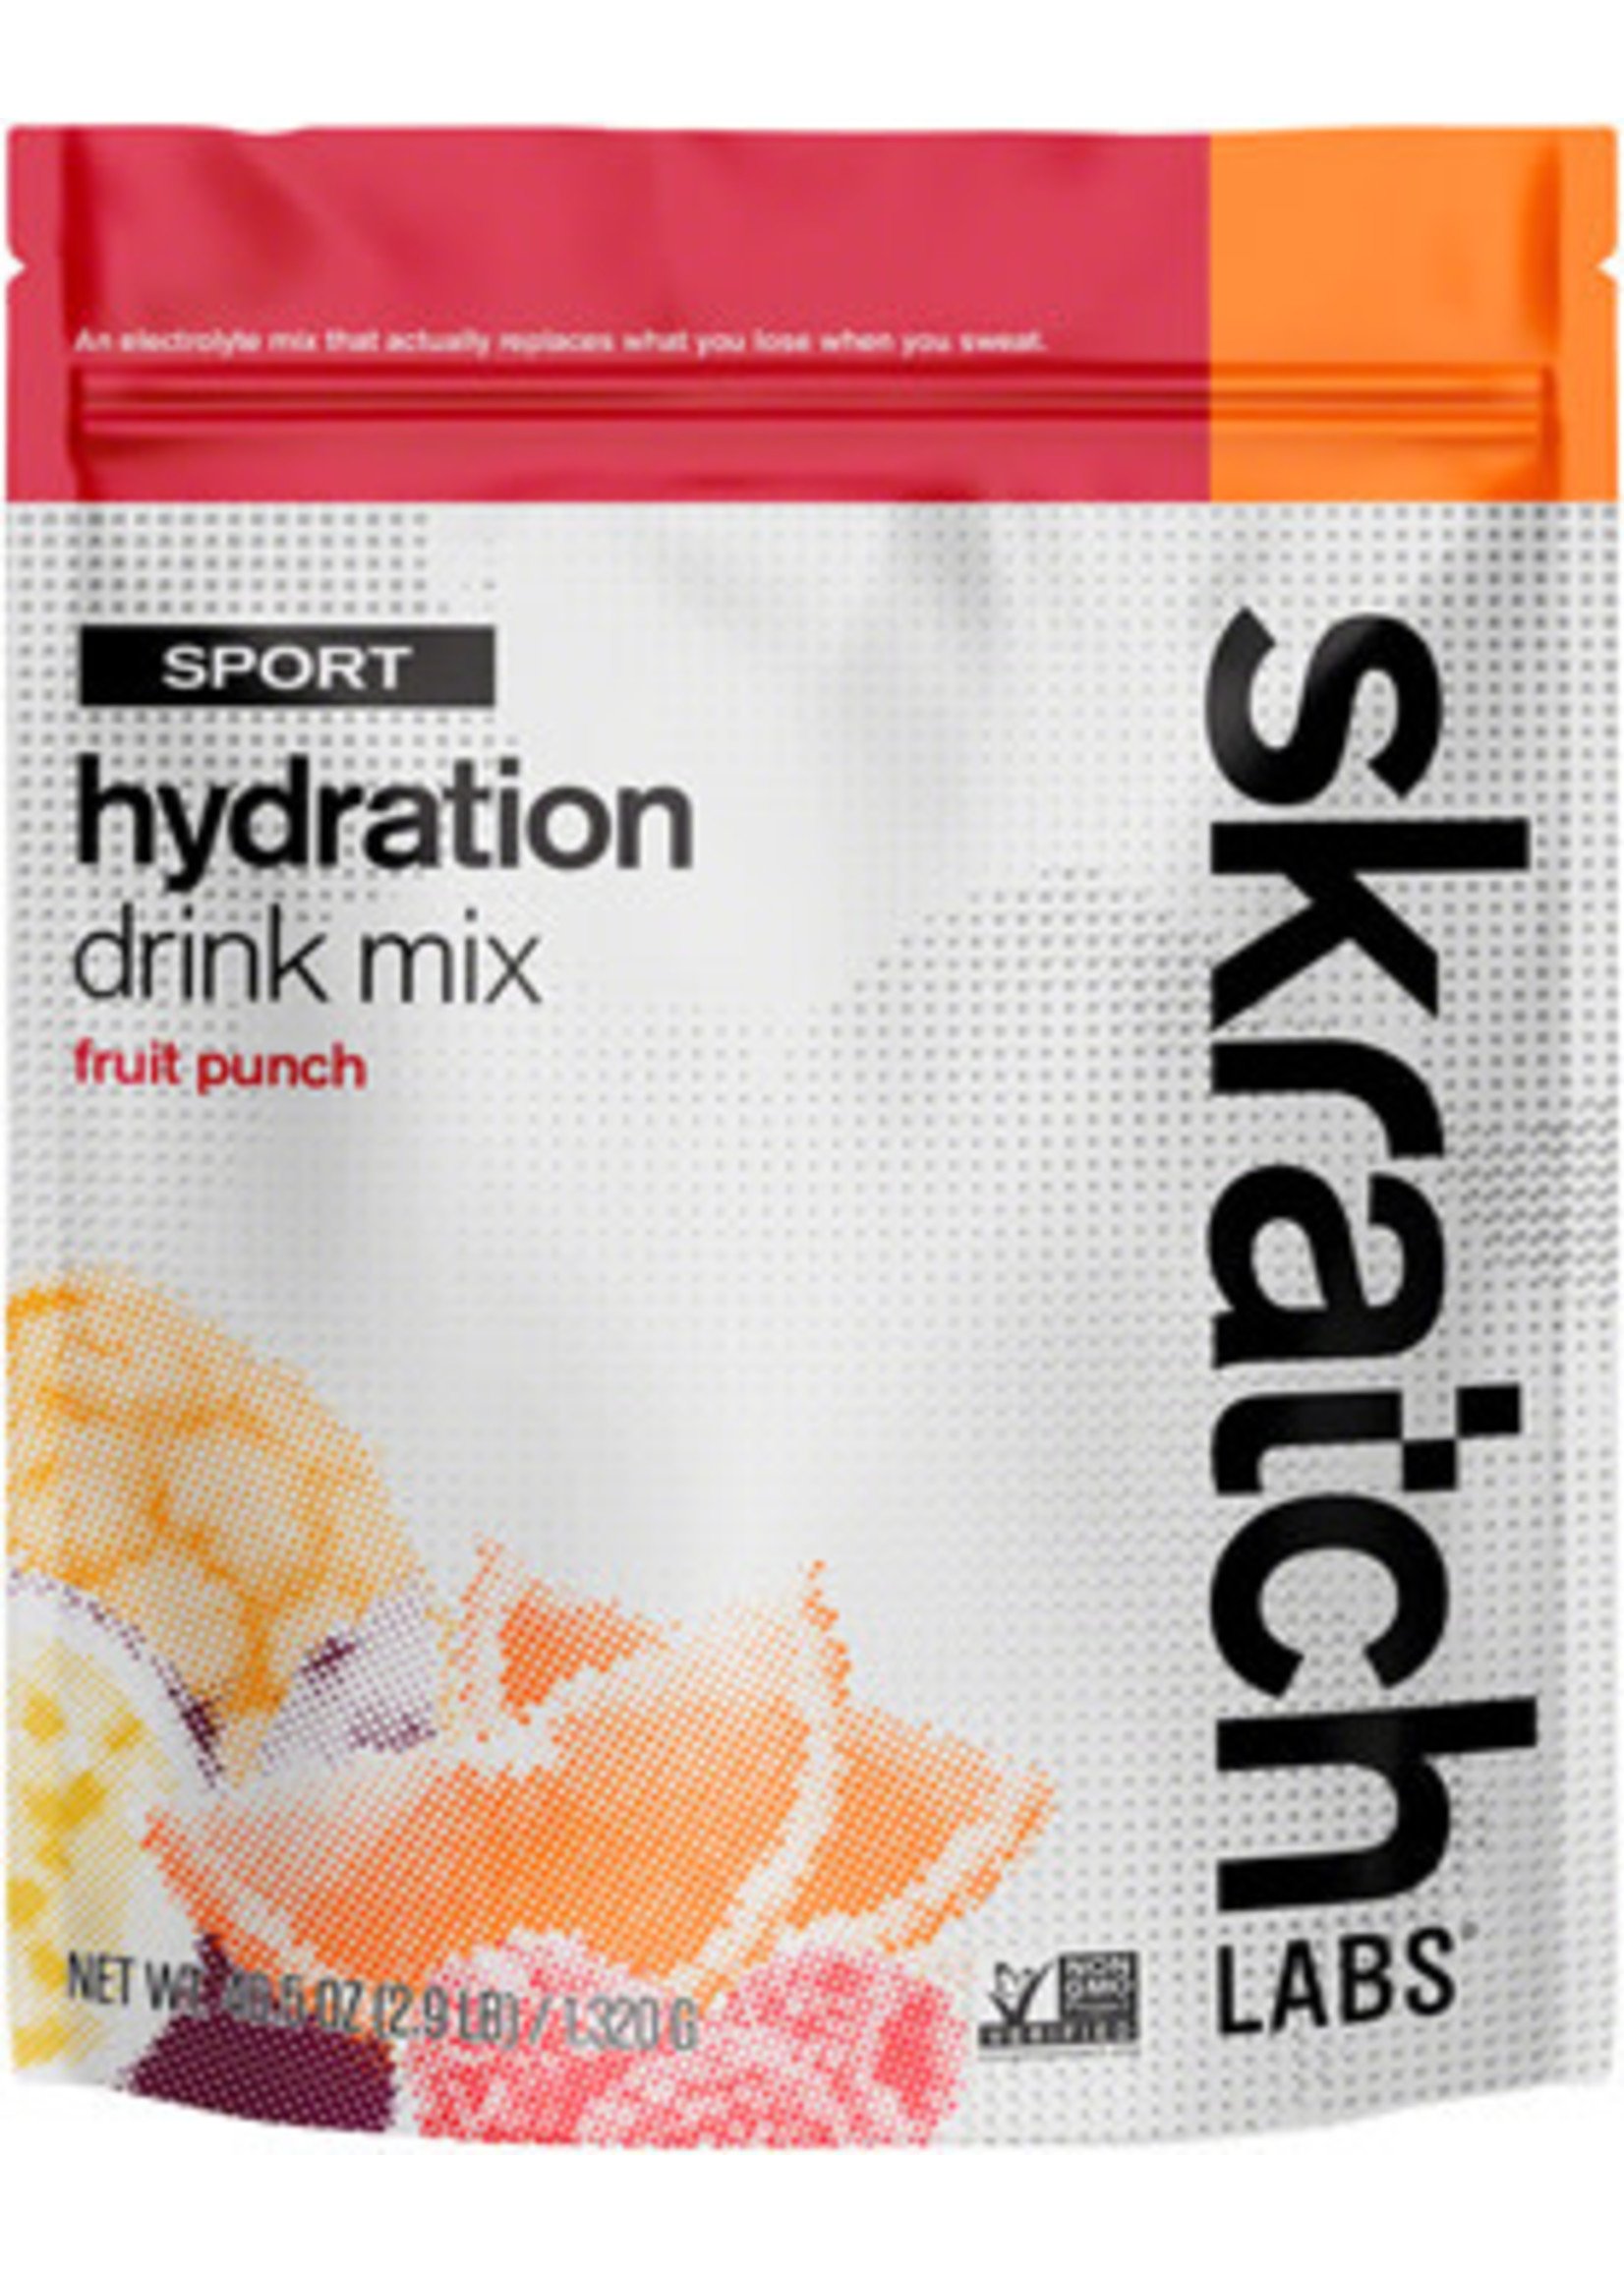 Skratch Skratch Labs Sport Hydration Drink Mix - Fruit Punch, 60 -Serving Resealable Pouch